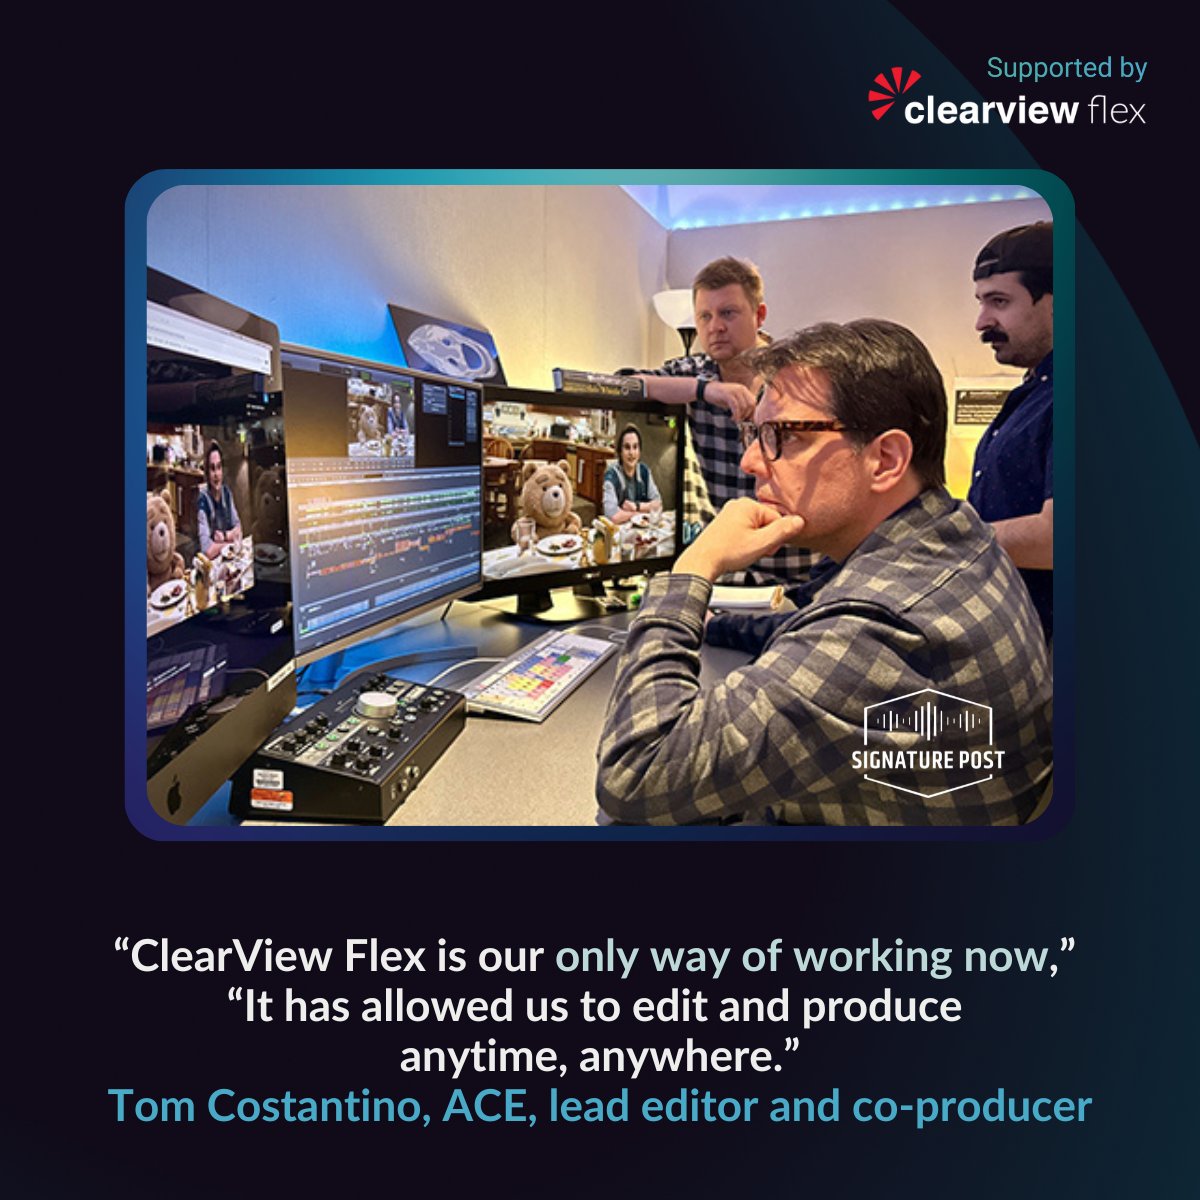 For Seth McFarlane and Tom Costantino, ACE - ClearView Flex Is Pure Logic for TED' #remotecollaboration #TED #clearviewflex #SethMacFarlane #VFX #editing @SethMacFarlane @TomCostantino Read Read more ➡️ow.ly/sUlt50QqUCi